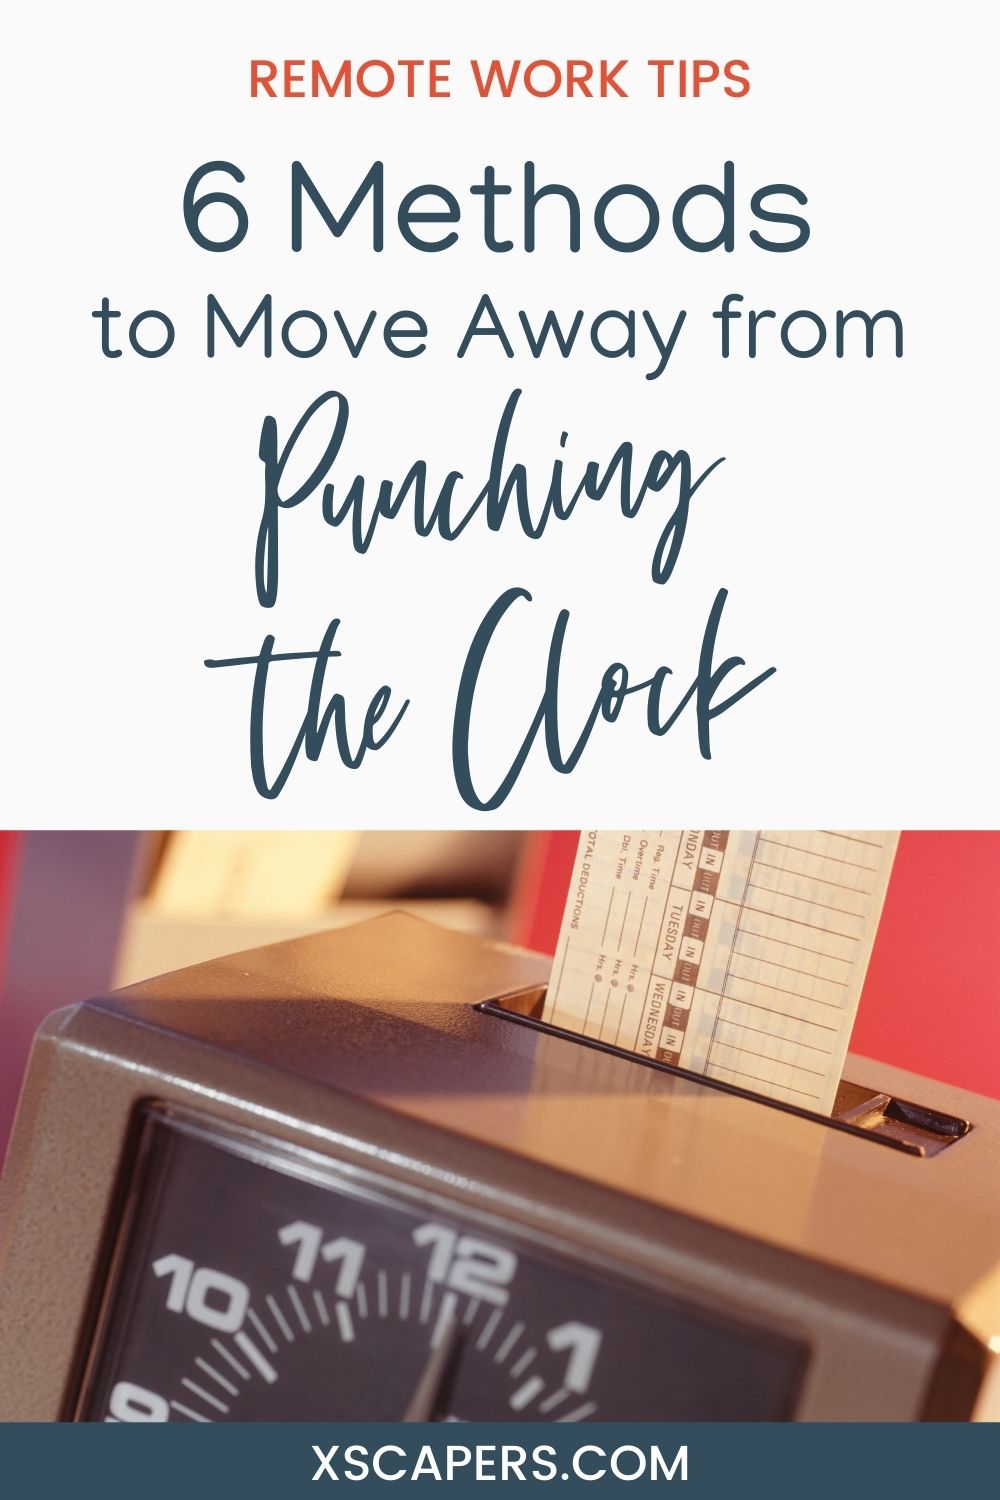 6 Methods to Move Away from "Punching the Clock" 2